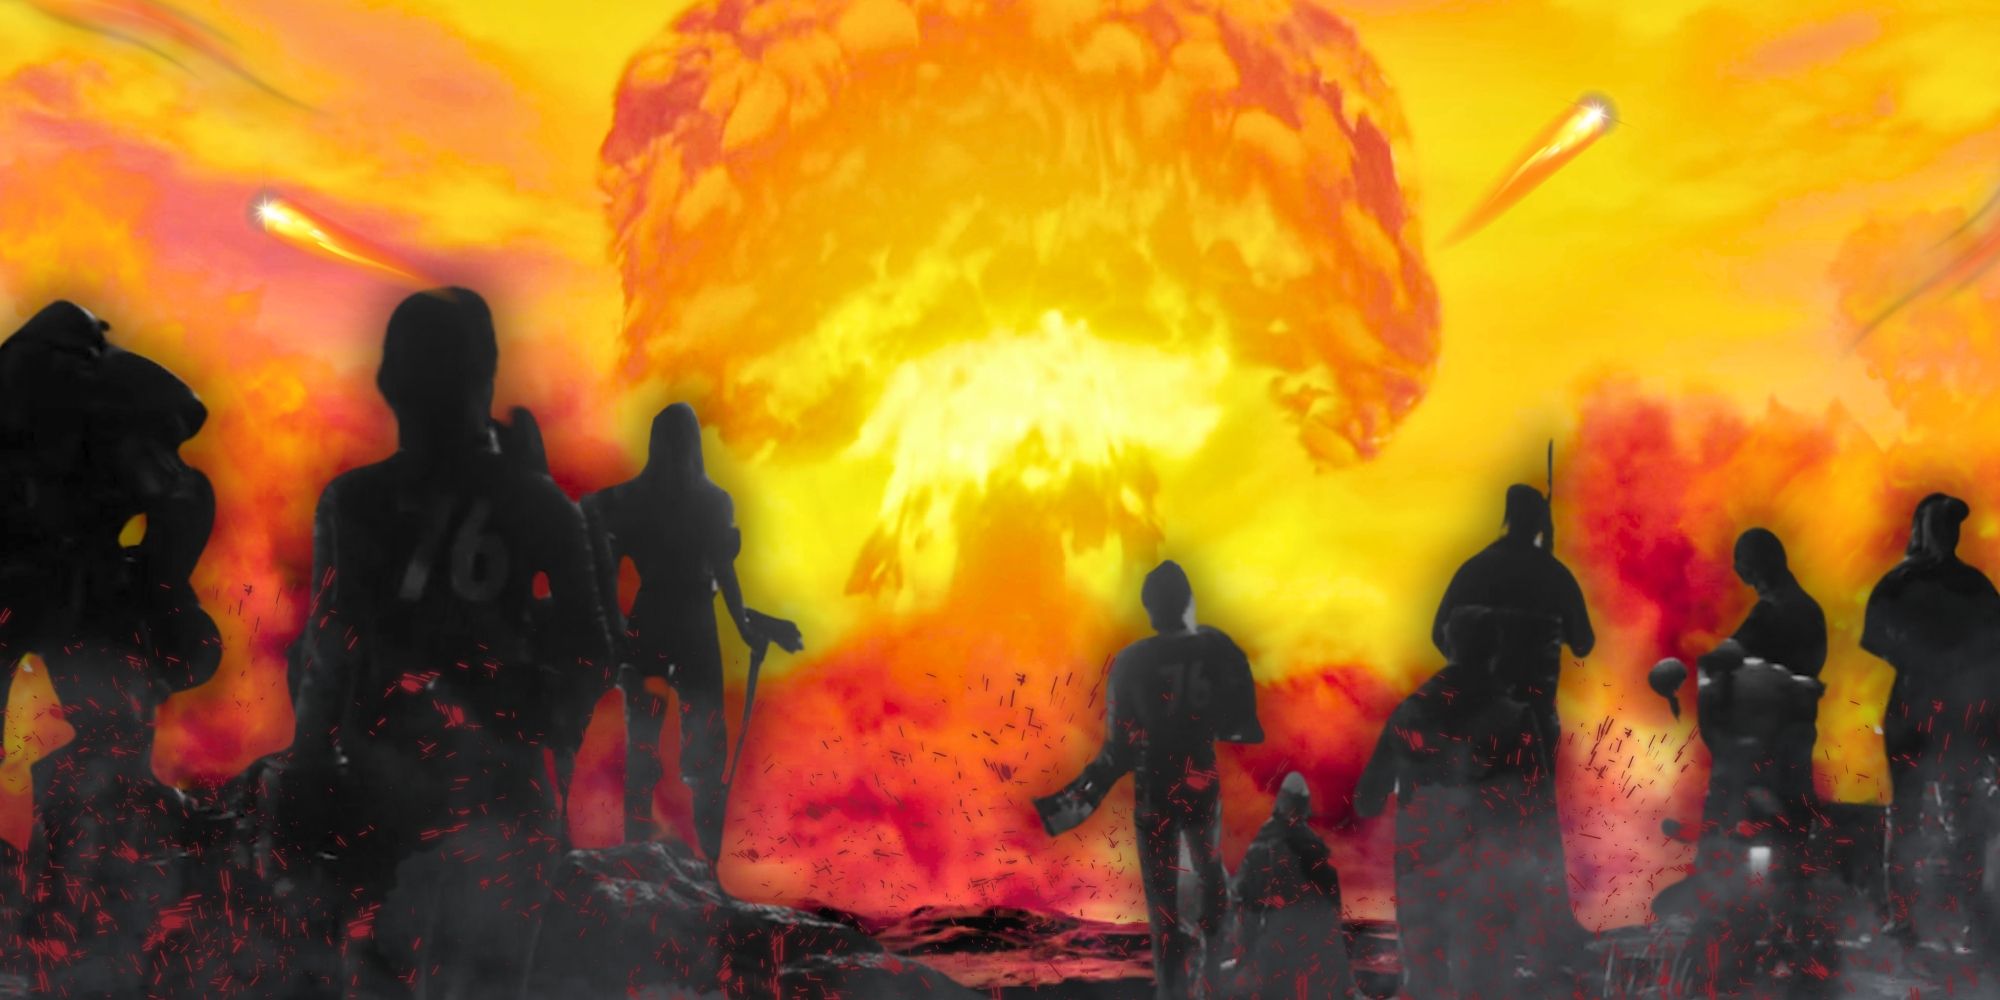 Black silhouettes face a bright nuclear explosion in the distance.